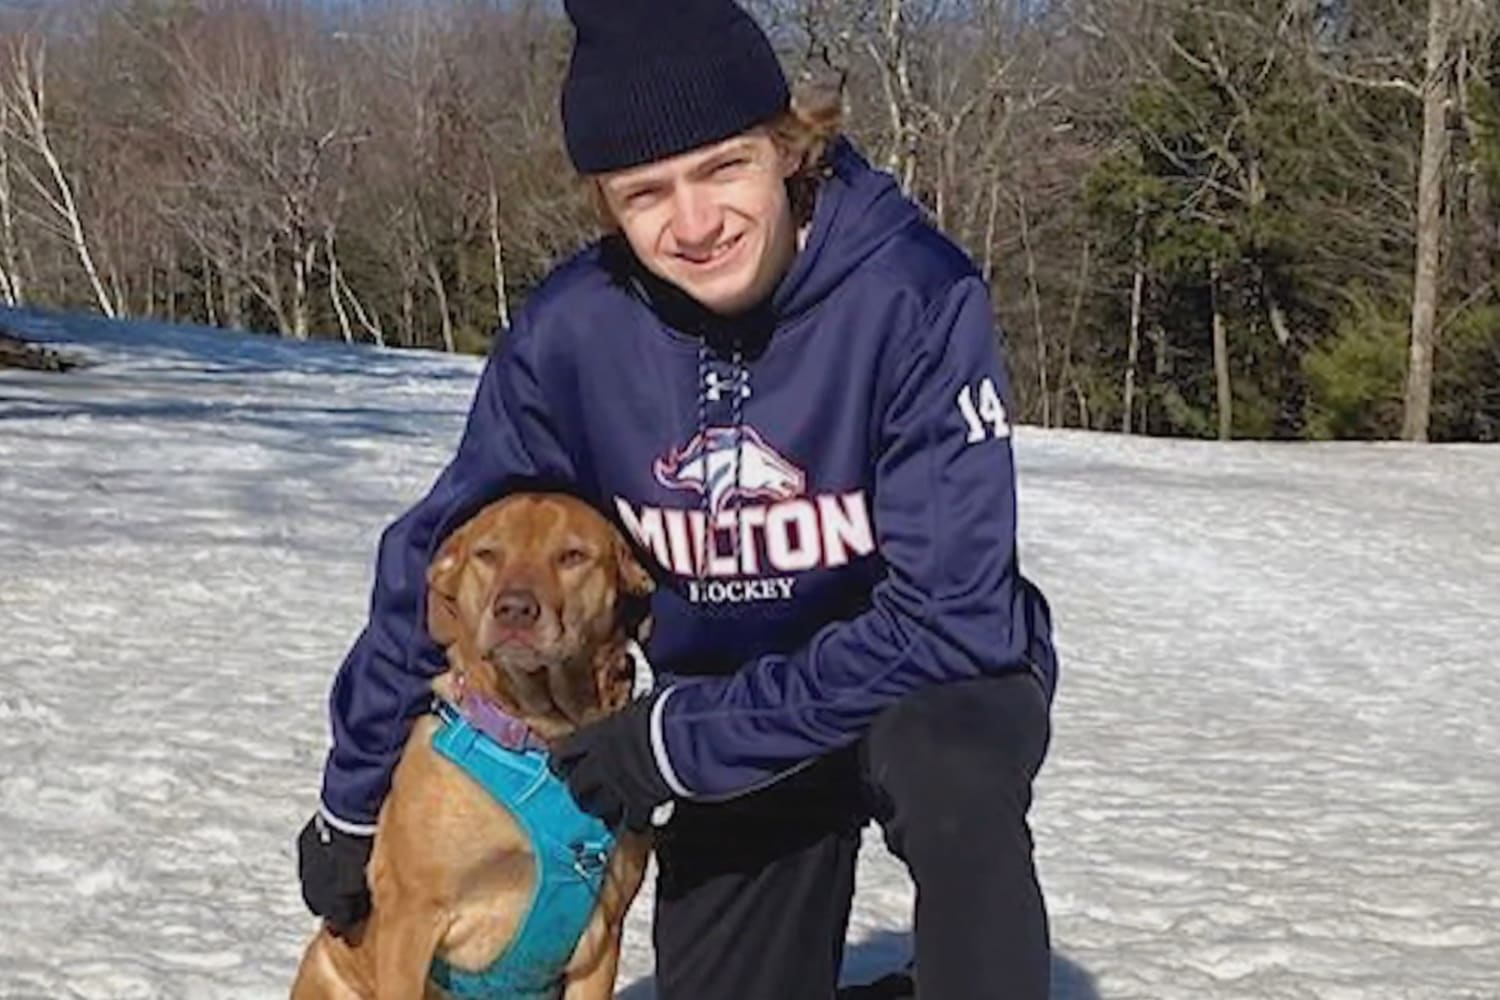 Hockey Player Walks in With Cat on 'Canine Night' and the Reason